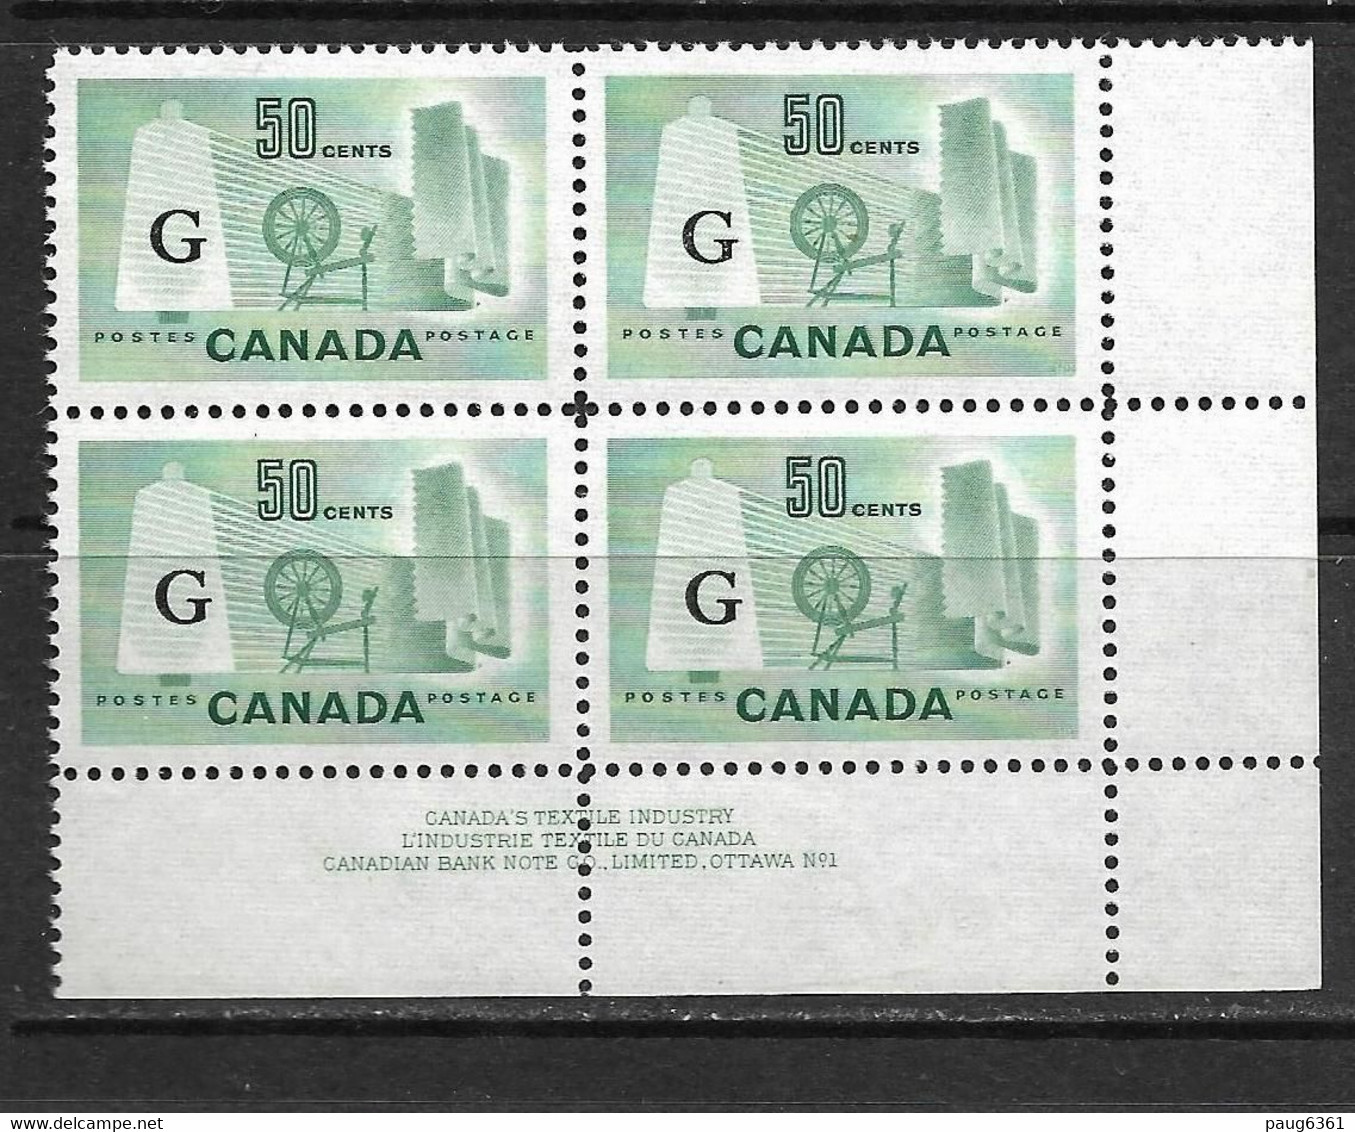 CANADA 1953 SERVICE-INDUSTRIES TEXTILES  BLOC DE 4 YVERT N°S38 NEUF MNH**/MLH* - Sovraccarichi